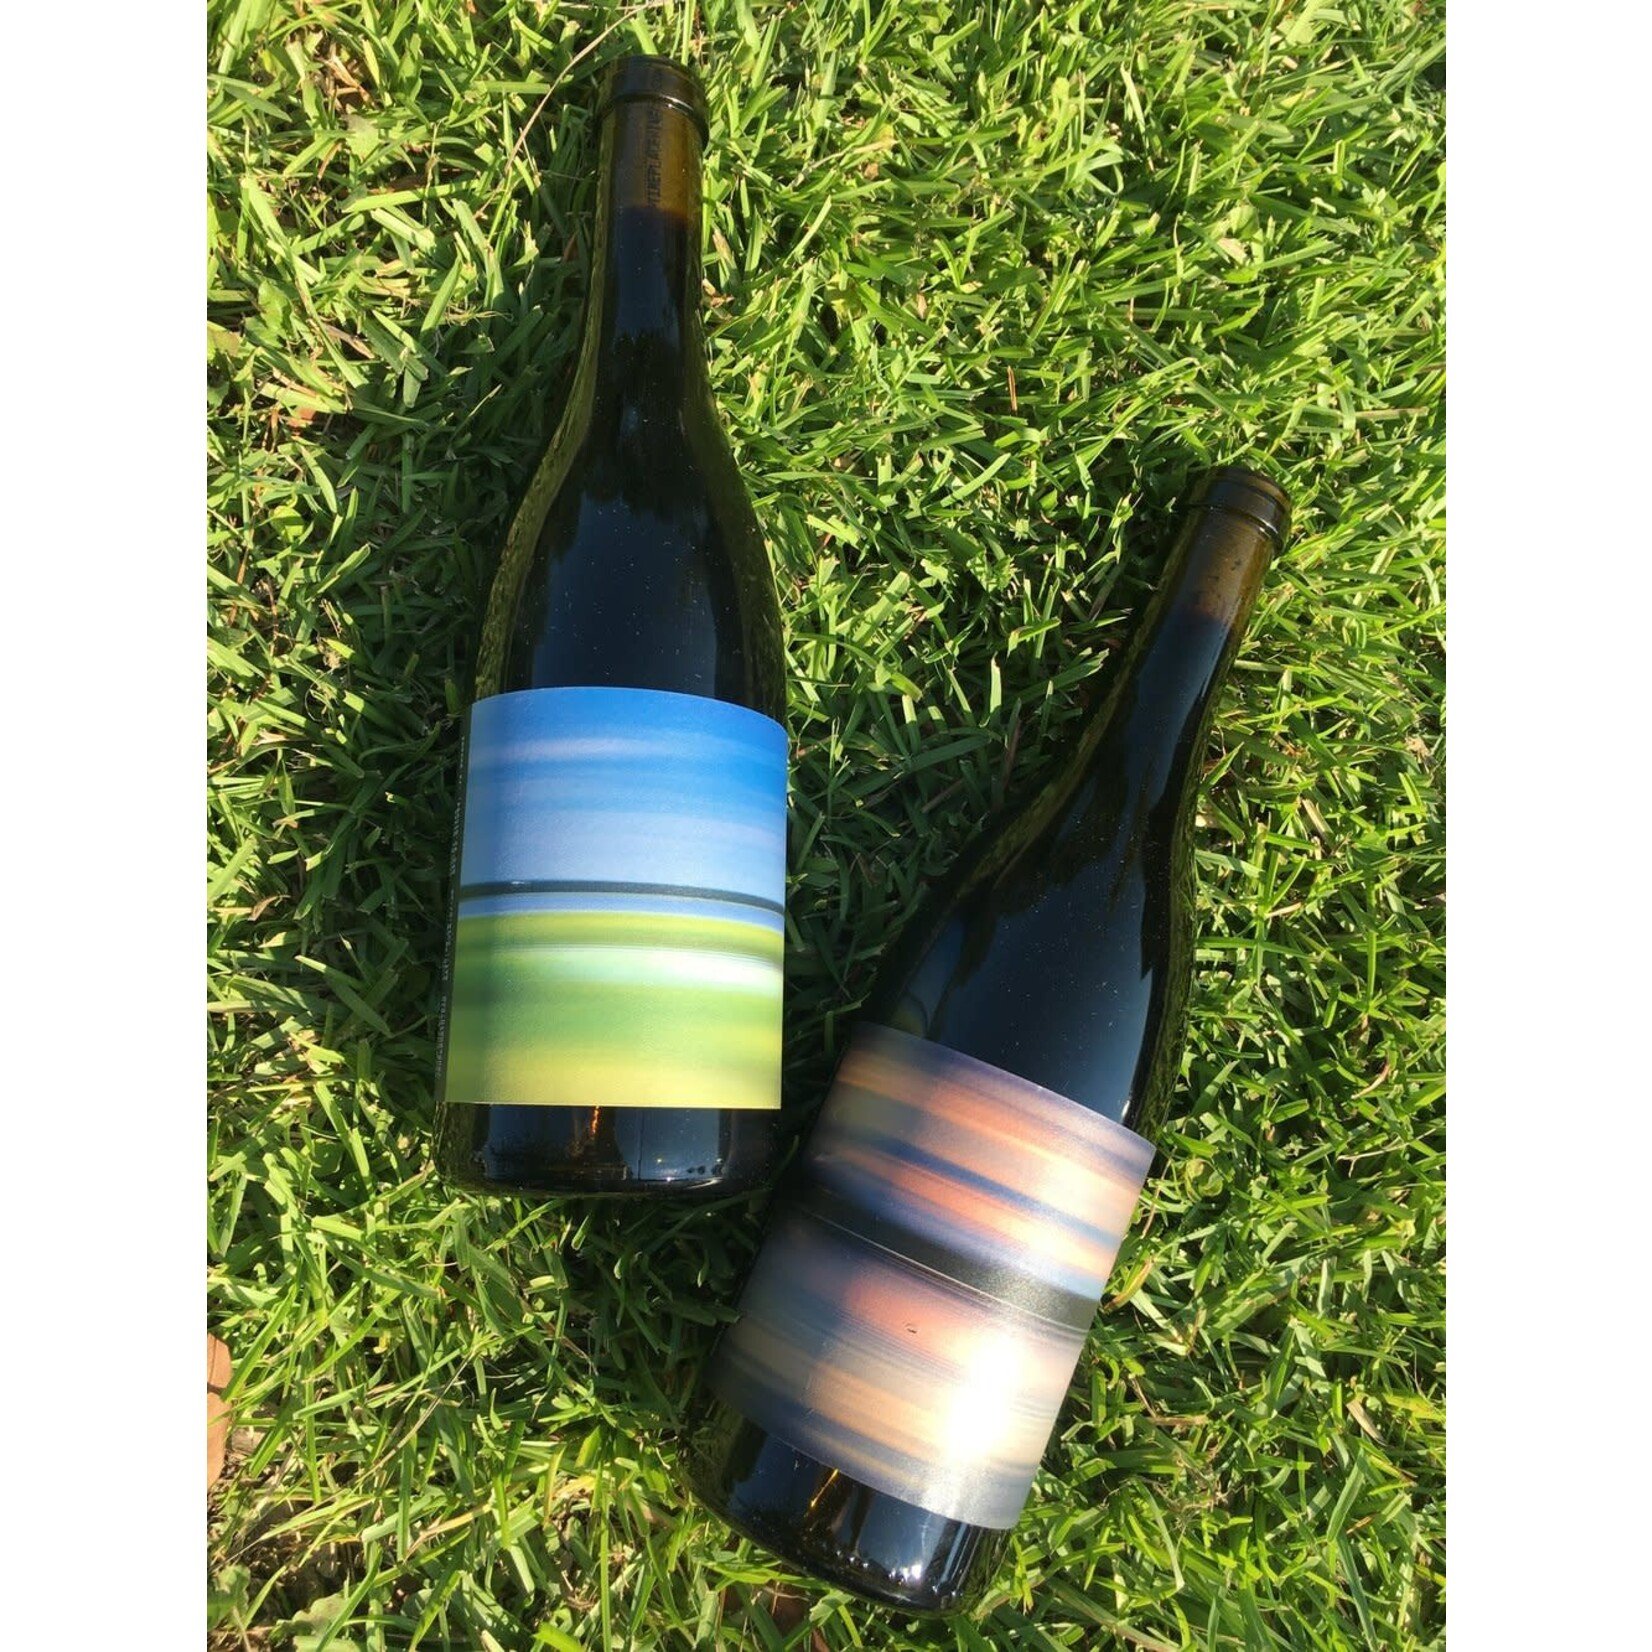 Time Place Wine Co Chardonnay 2021 Monterey County California